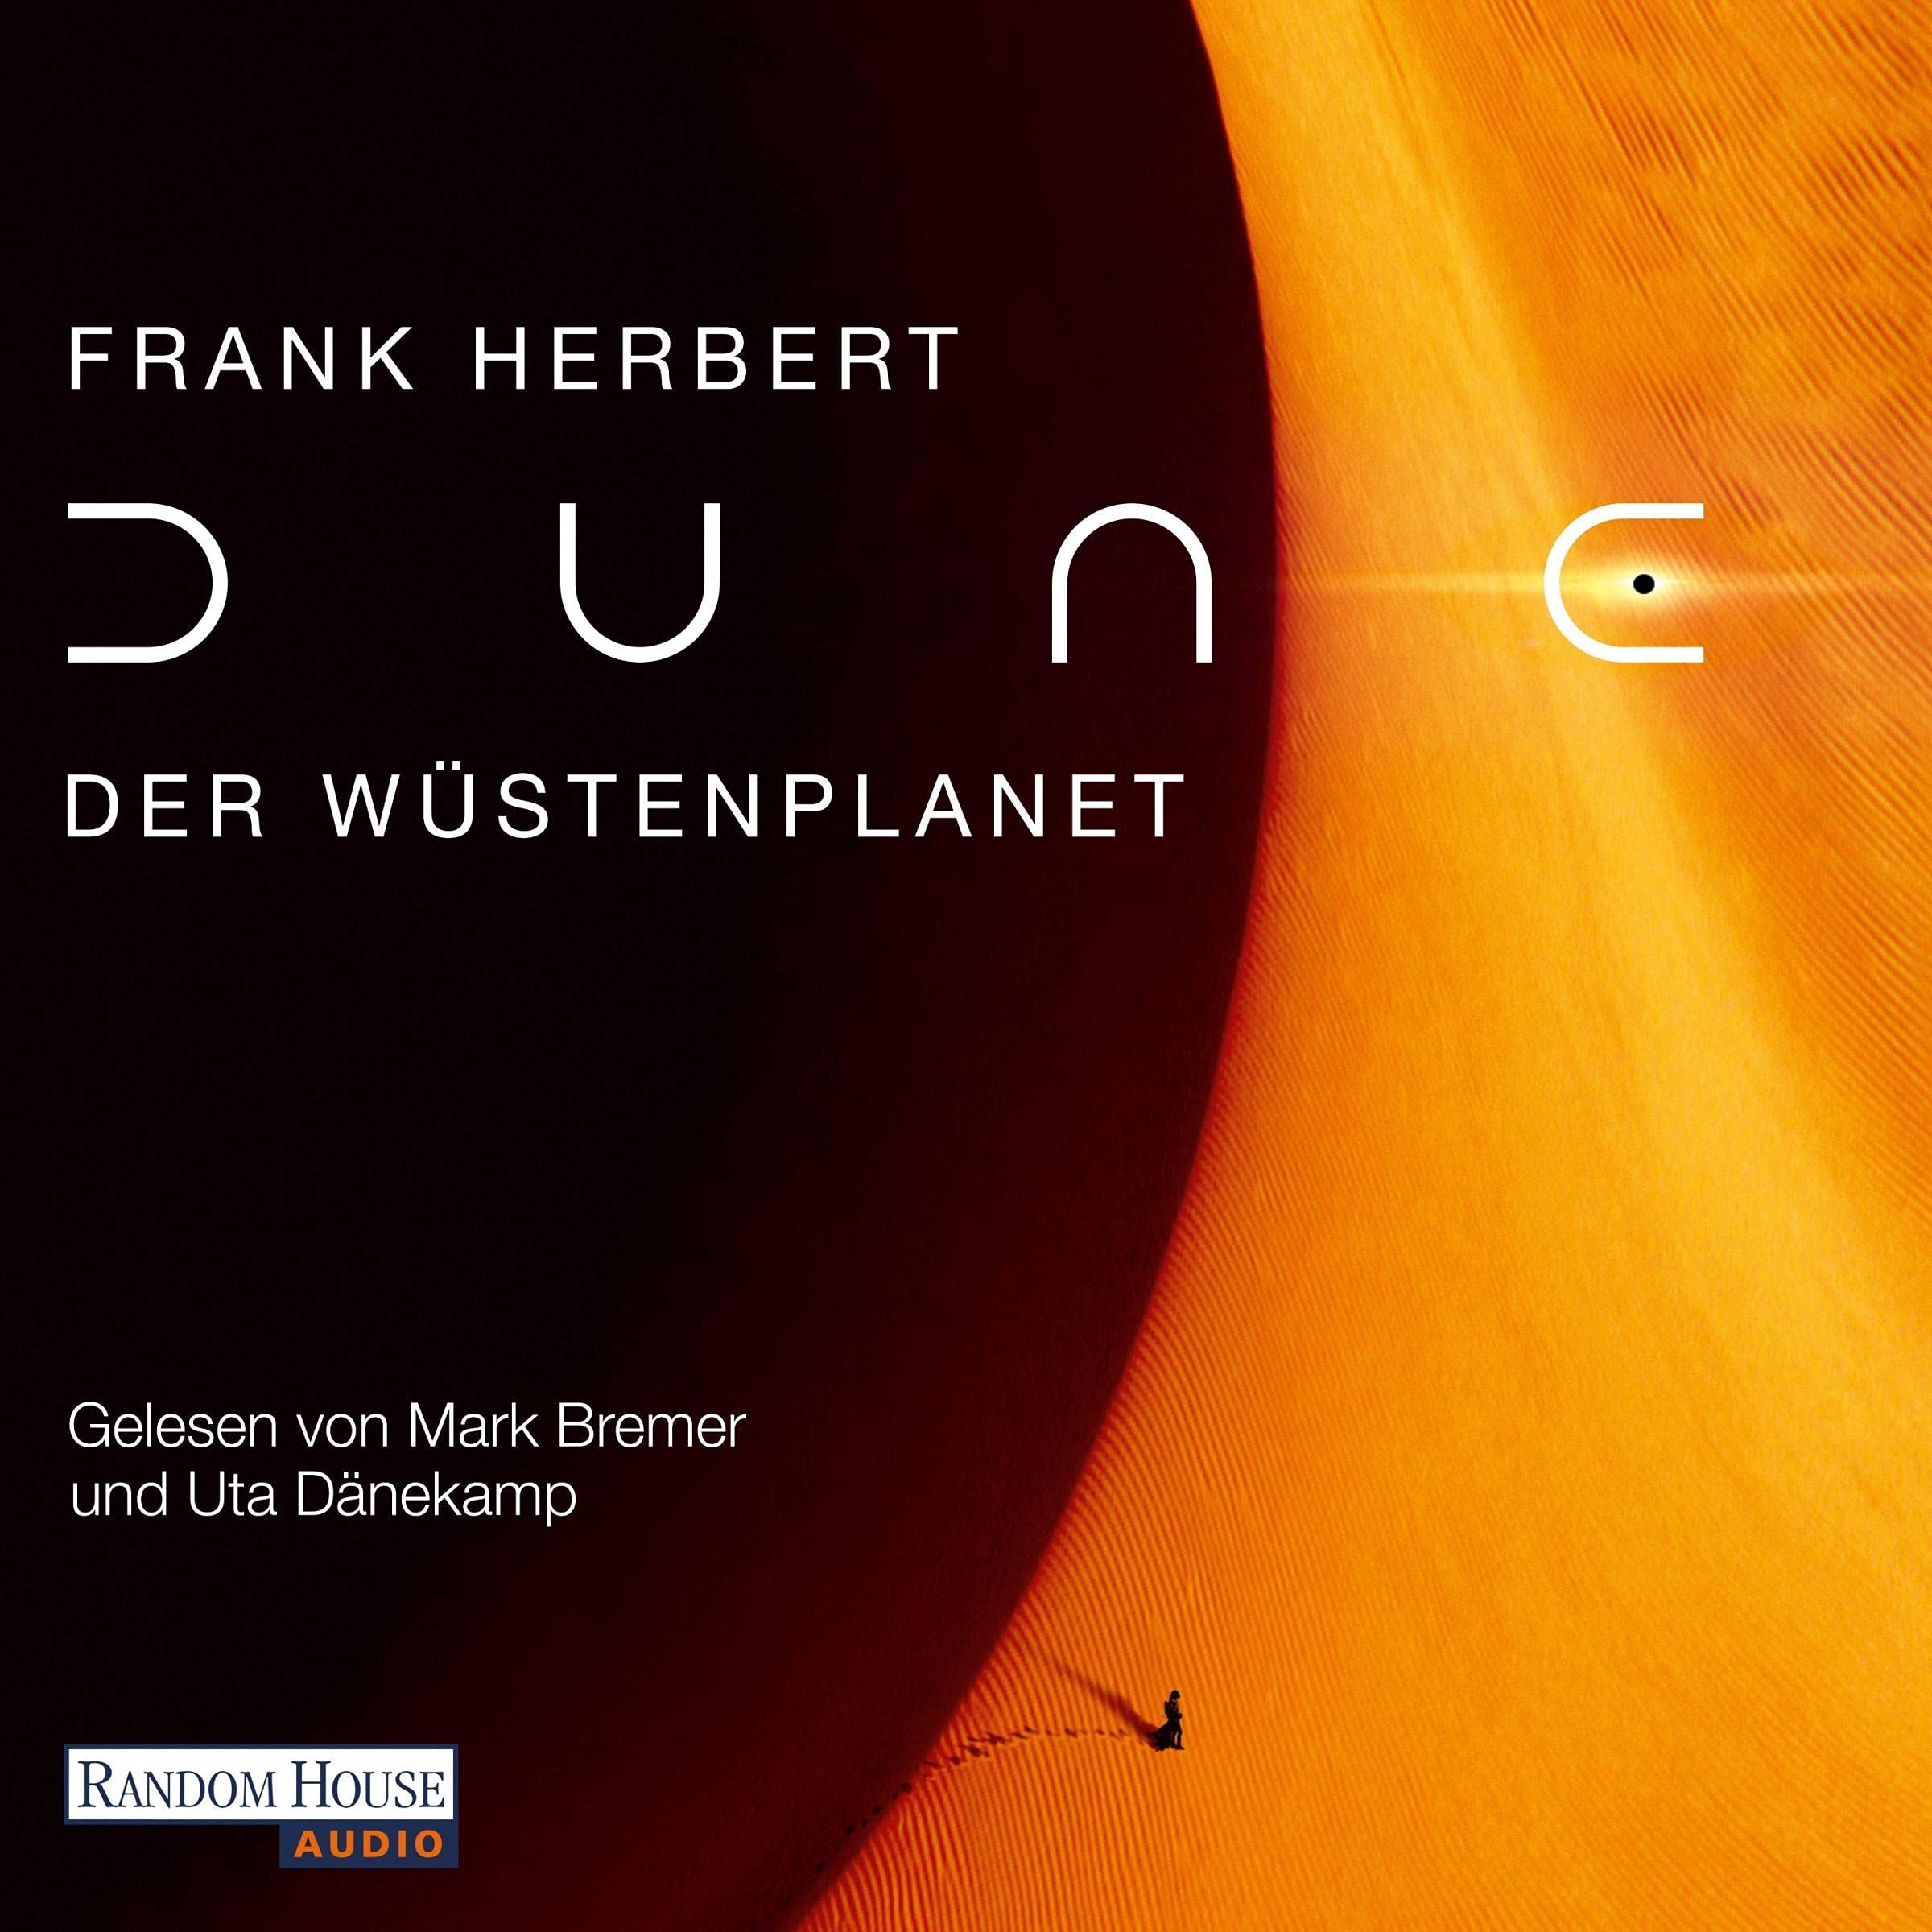 Dune cover